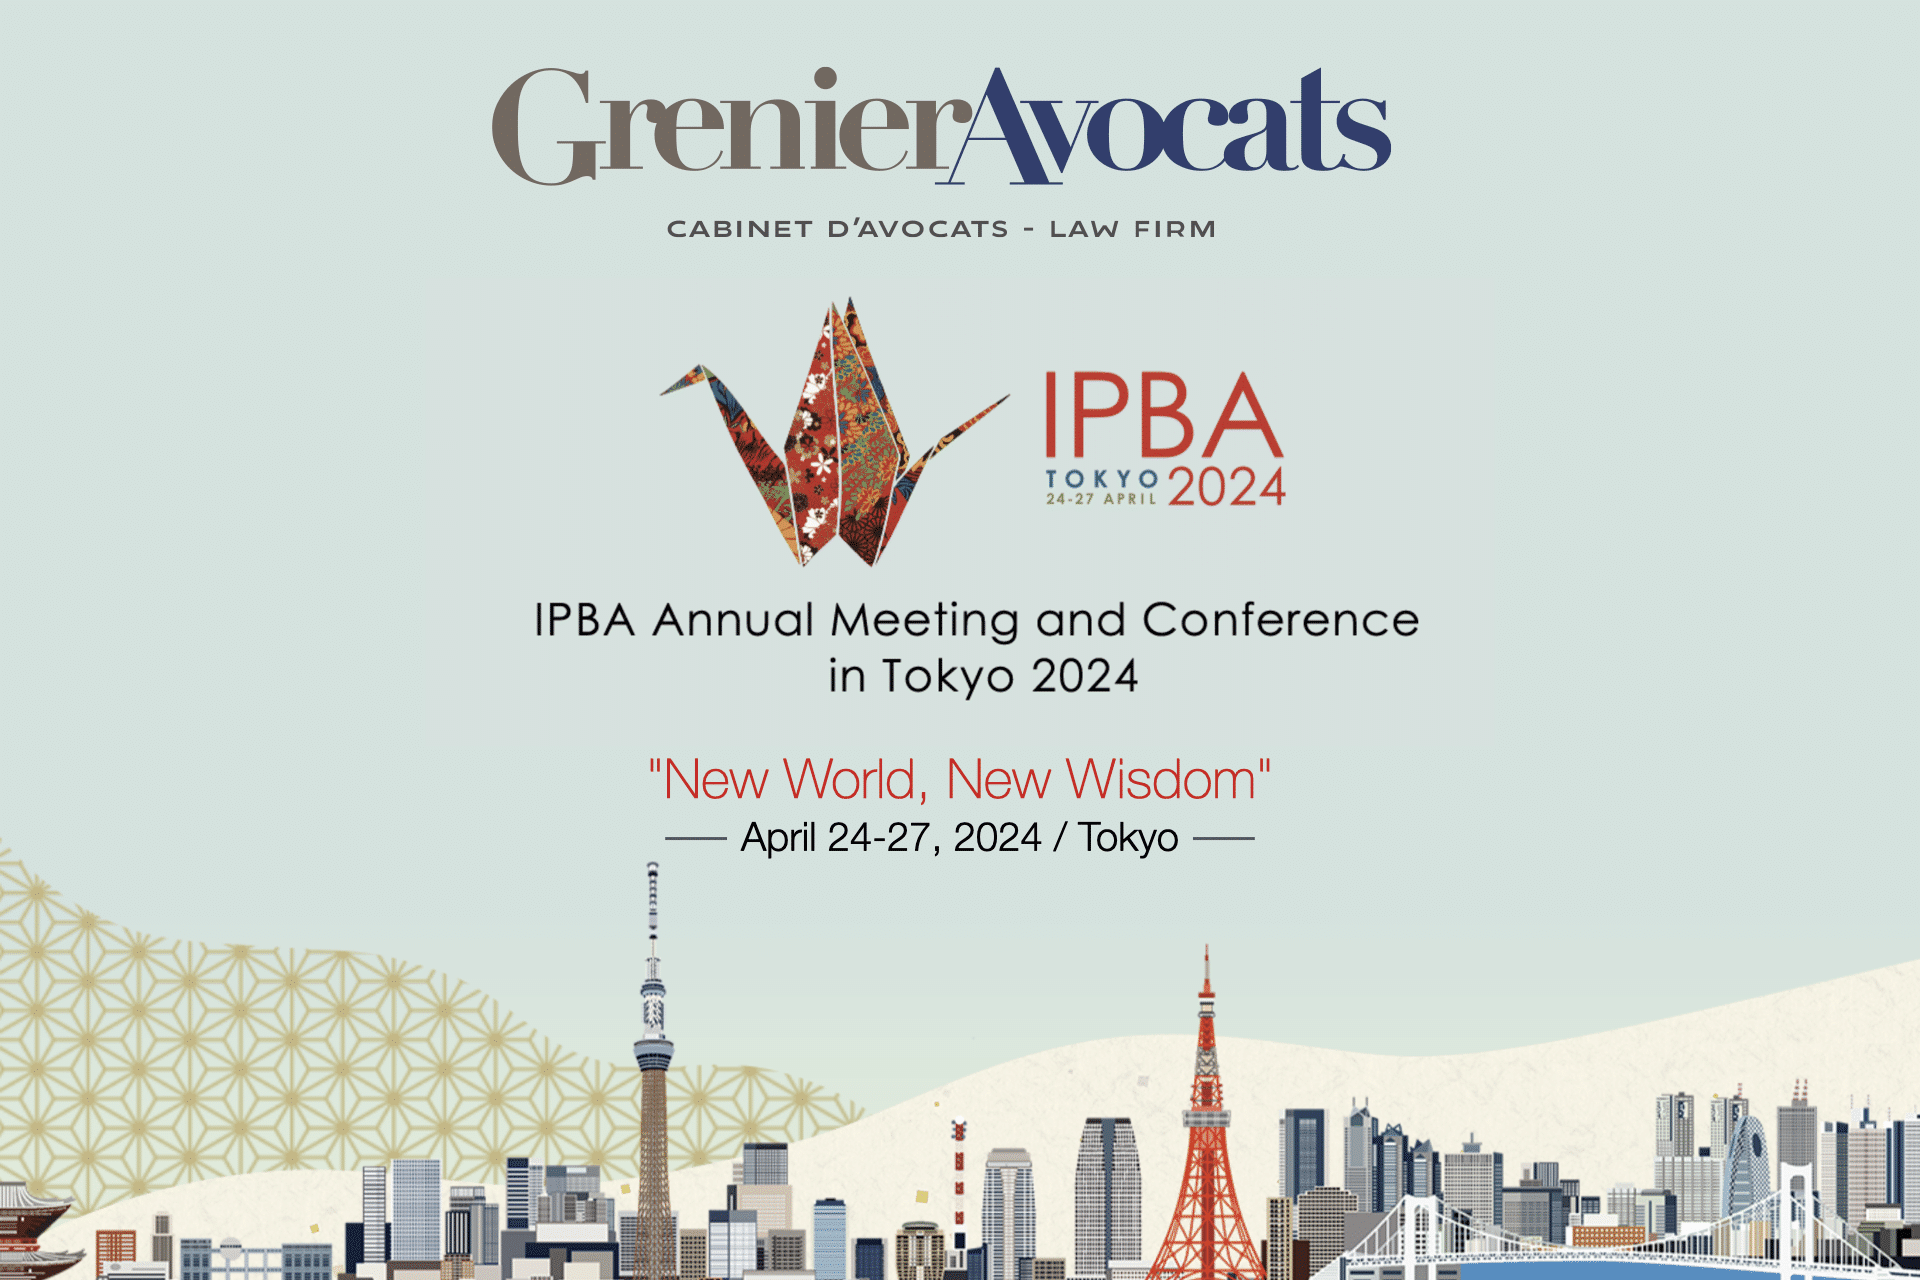 IPBA Annual Meeting and Conference 2024 in Tokyo, “New World, New Wisdom”